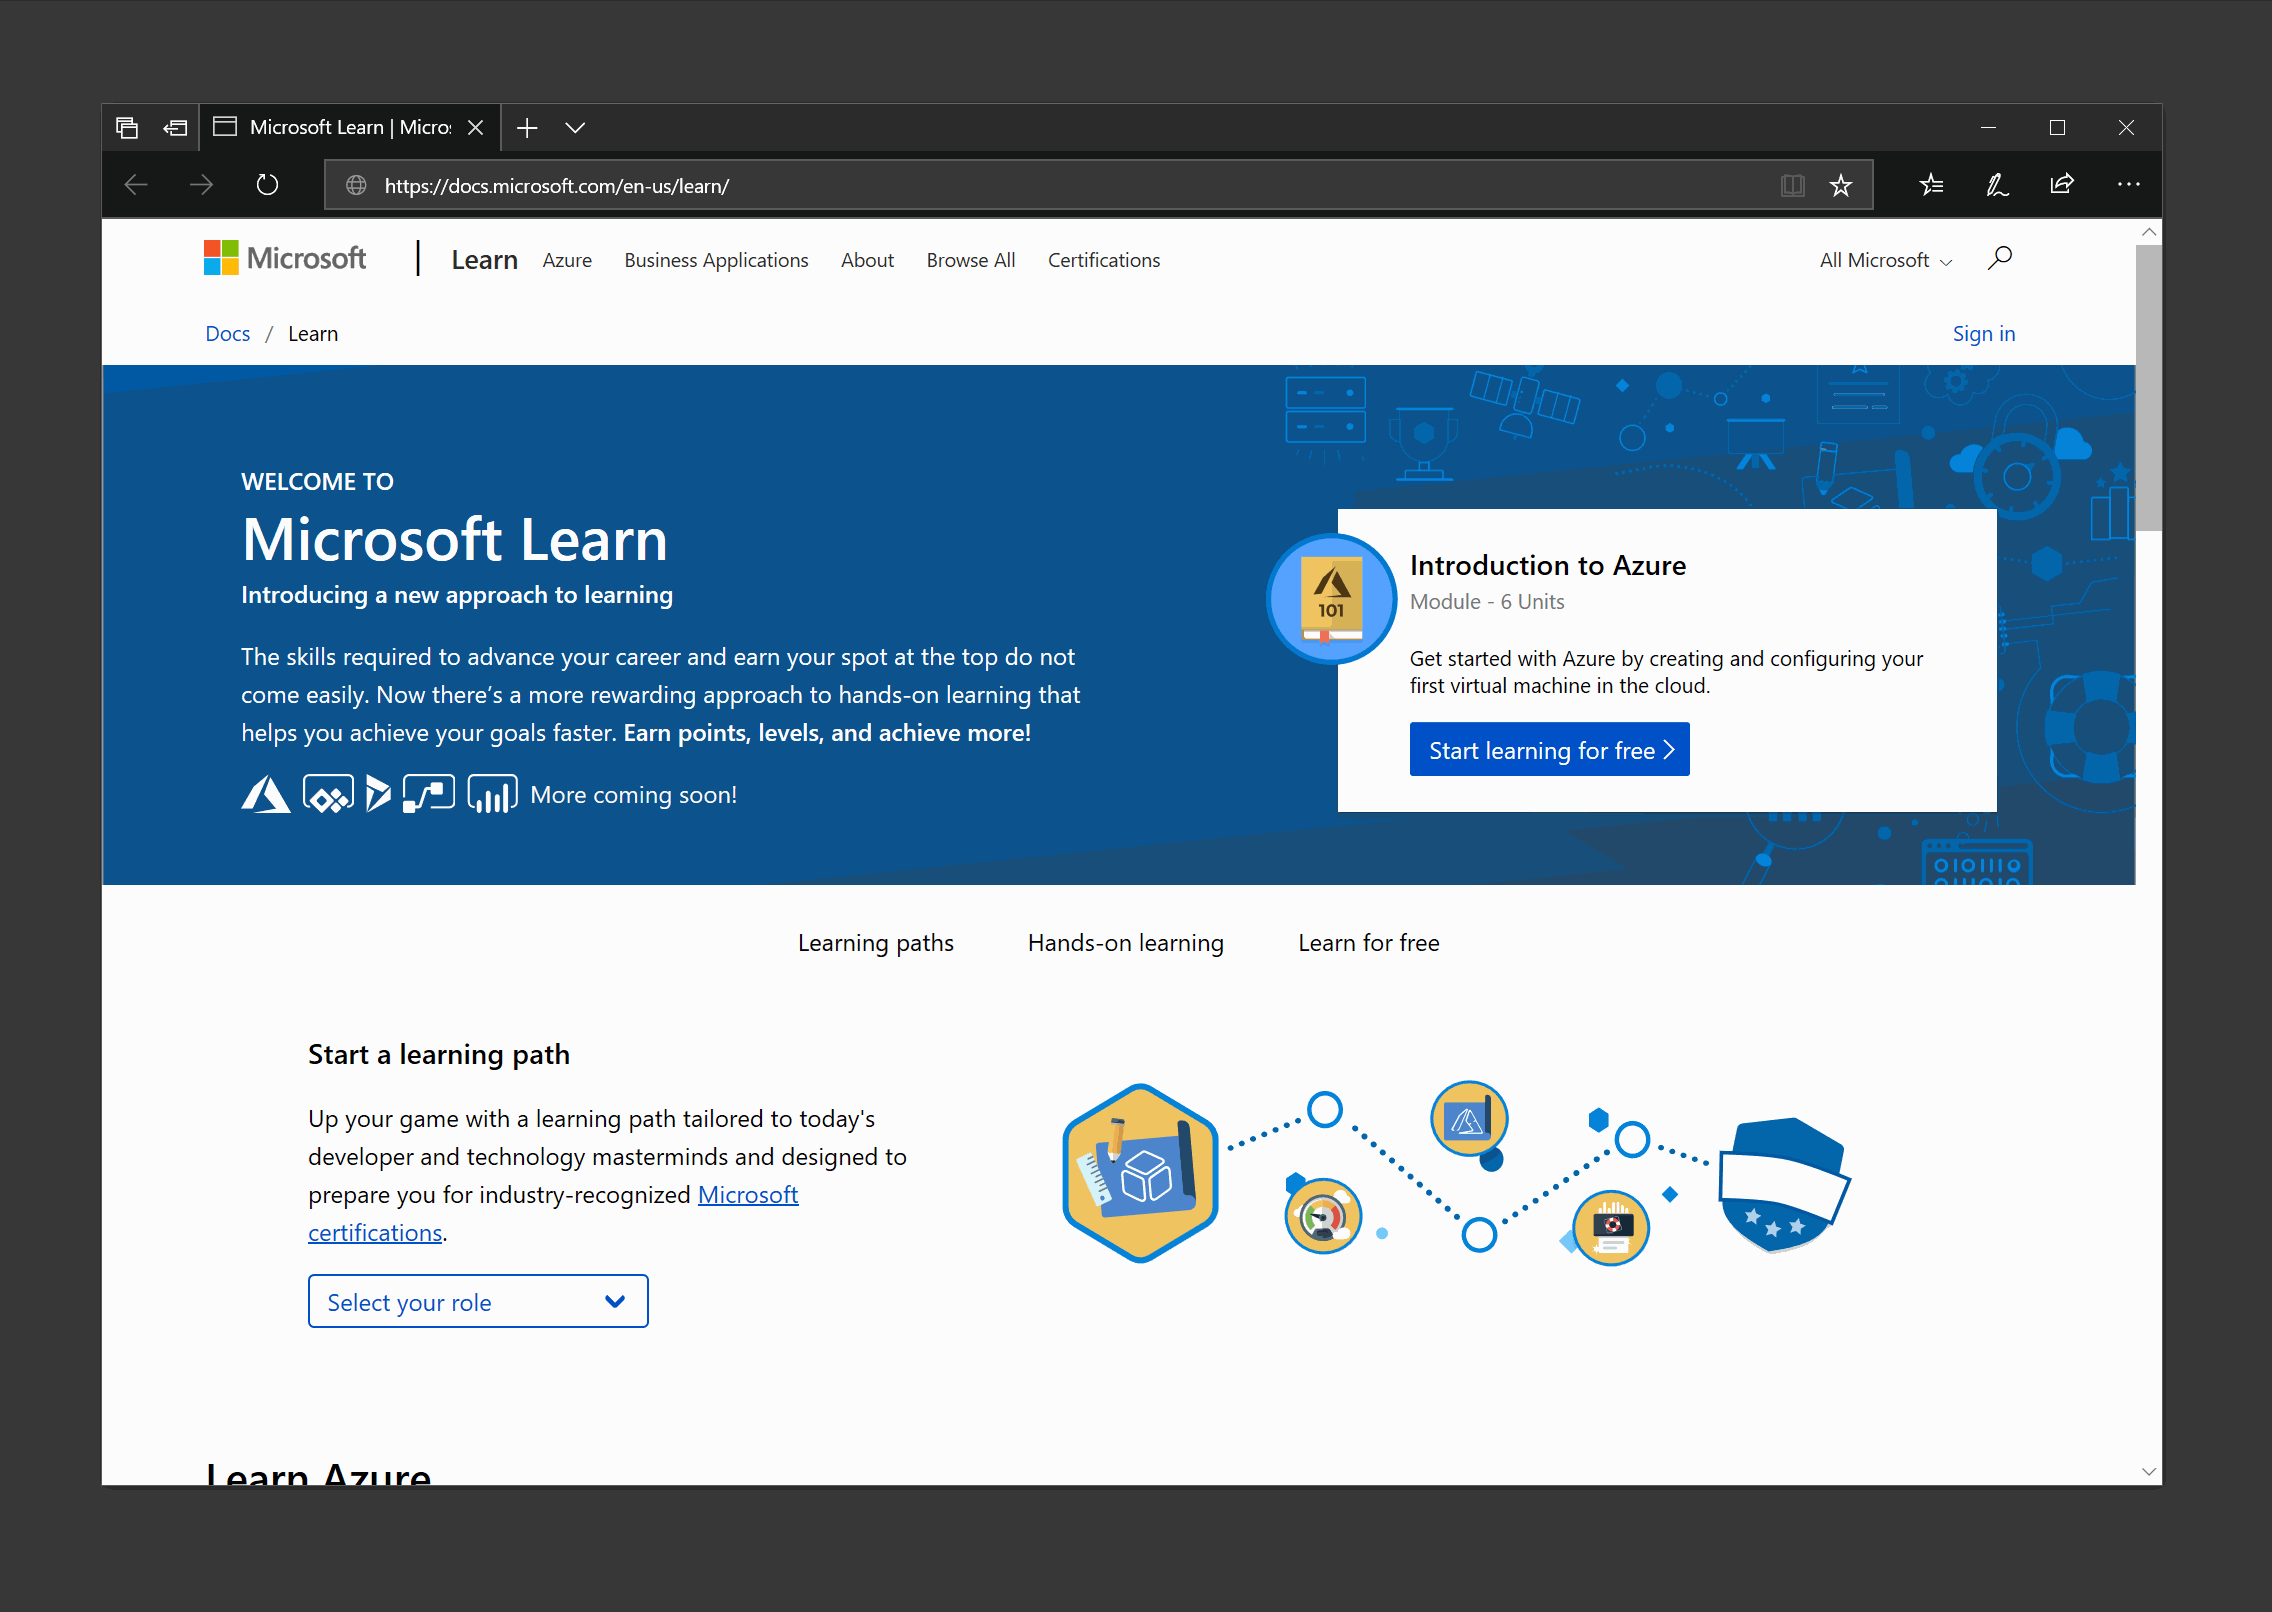 A quick tour of the Microsoft Learn experience